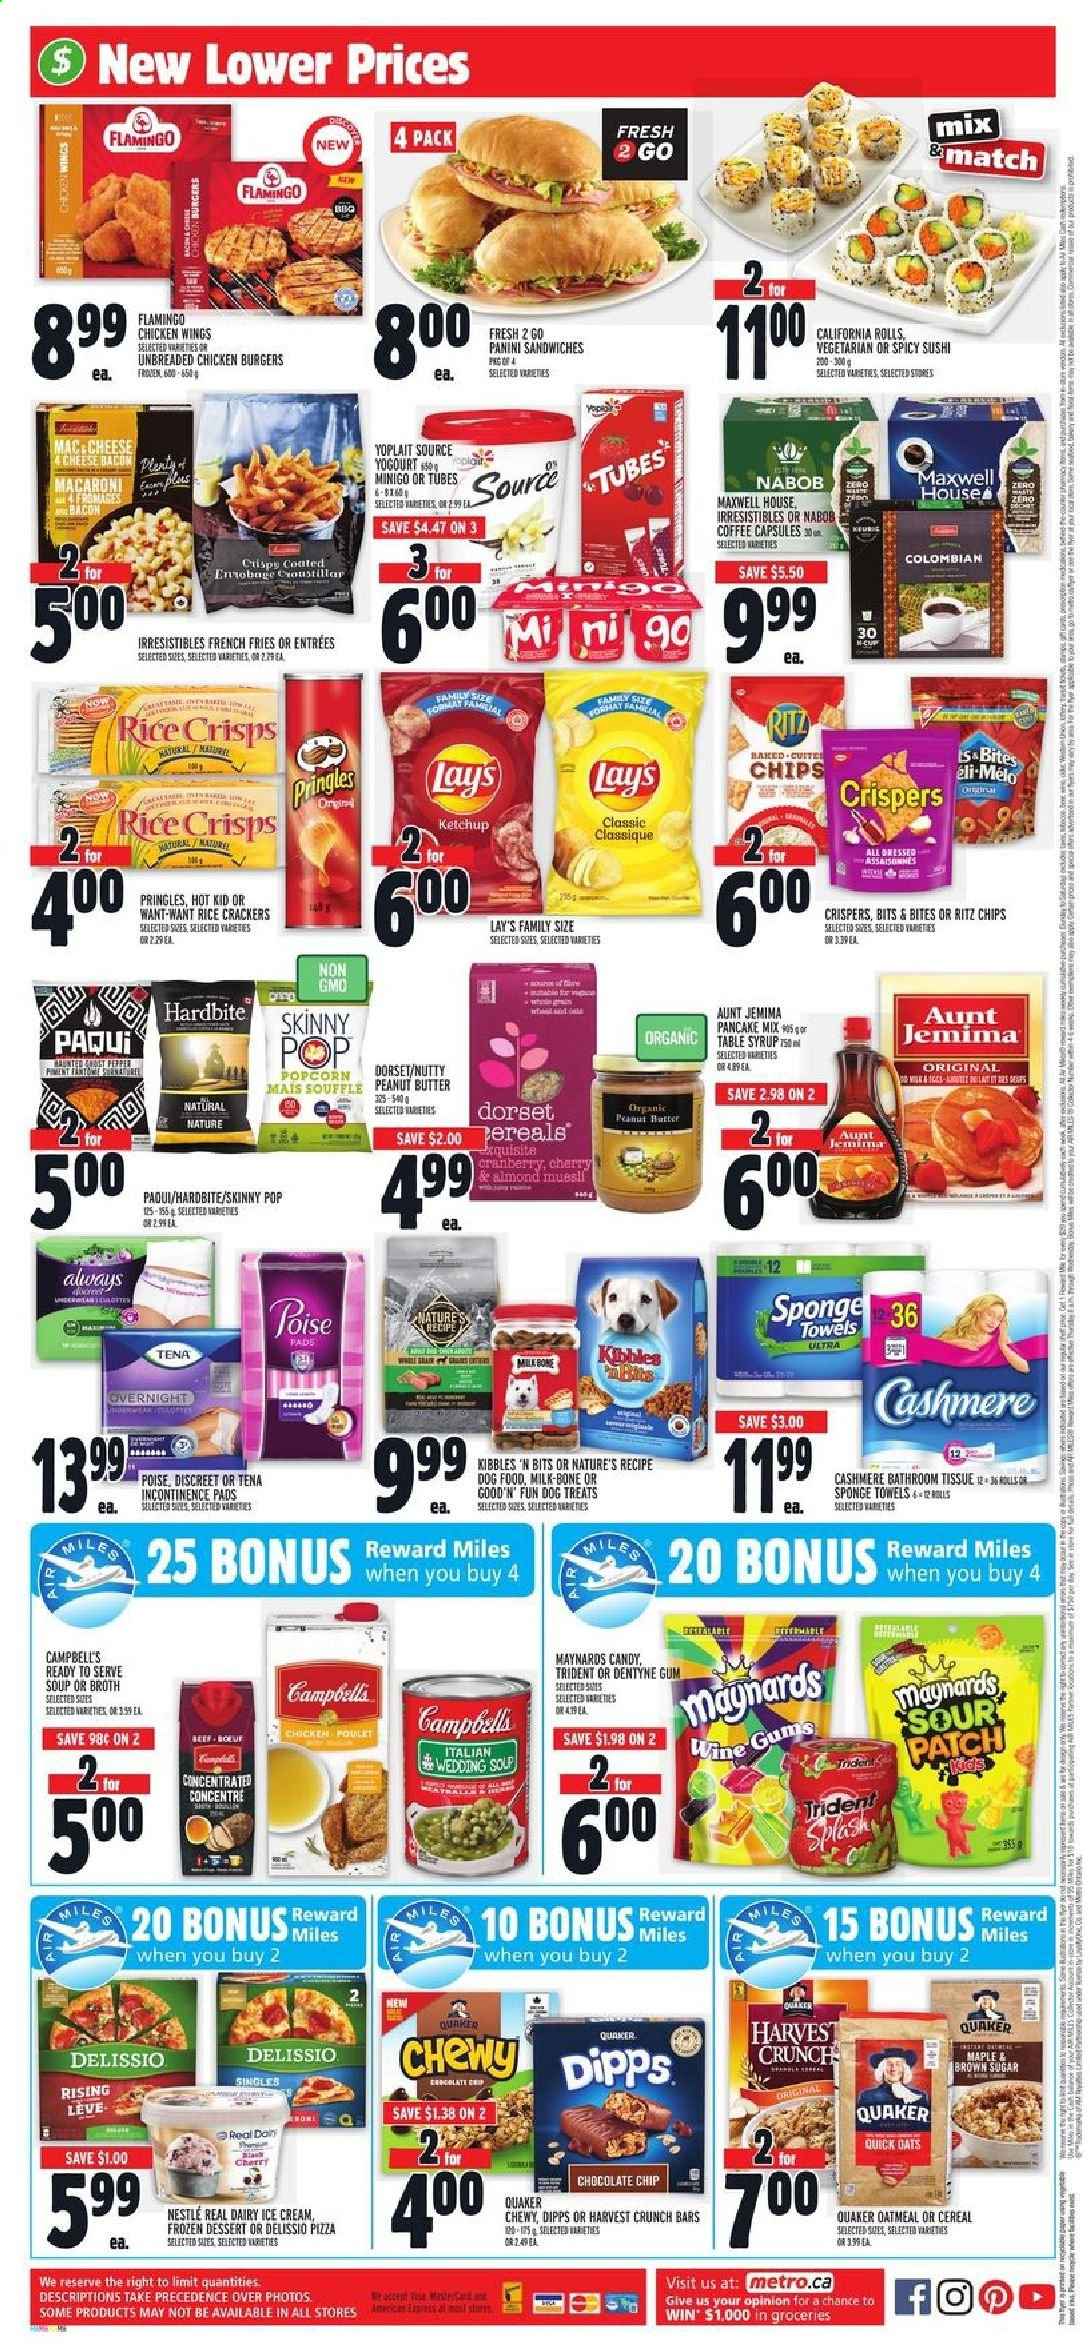 thumbnail - Metro Flyer - July 08, 2021 - July 14, 2021 - Sales products - panini, cherries, Campbell's, pizza, macaroni, soup, hamburger, pancakes, Quaker, bacon, Yoplait, milk, ice cream, chicken wings, potato fries, french fries, crackers, Trident, RITZ, Pringles, Lay’s, popcorn, rice crackers, rice crisps, Skinny Pop, oatmeal, oats, broth, muesli, Quick Oats, peanut butter, syrup, Maxwell House, coffee, coffee capsules, Keurig, bath tissue, Plenty, sponge, towel, animal food, dog food, Nestlé. Page 12.